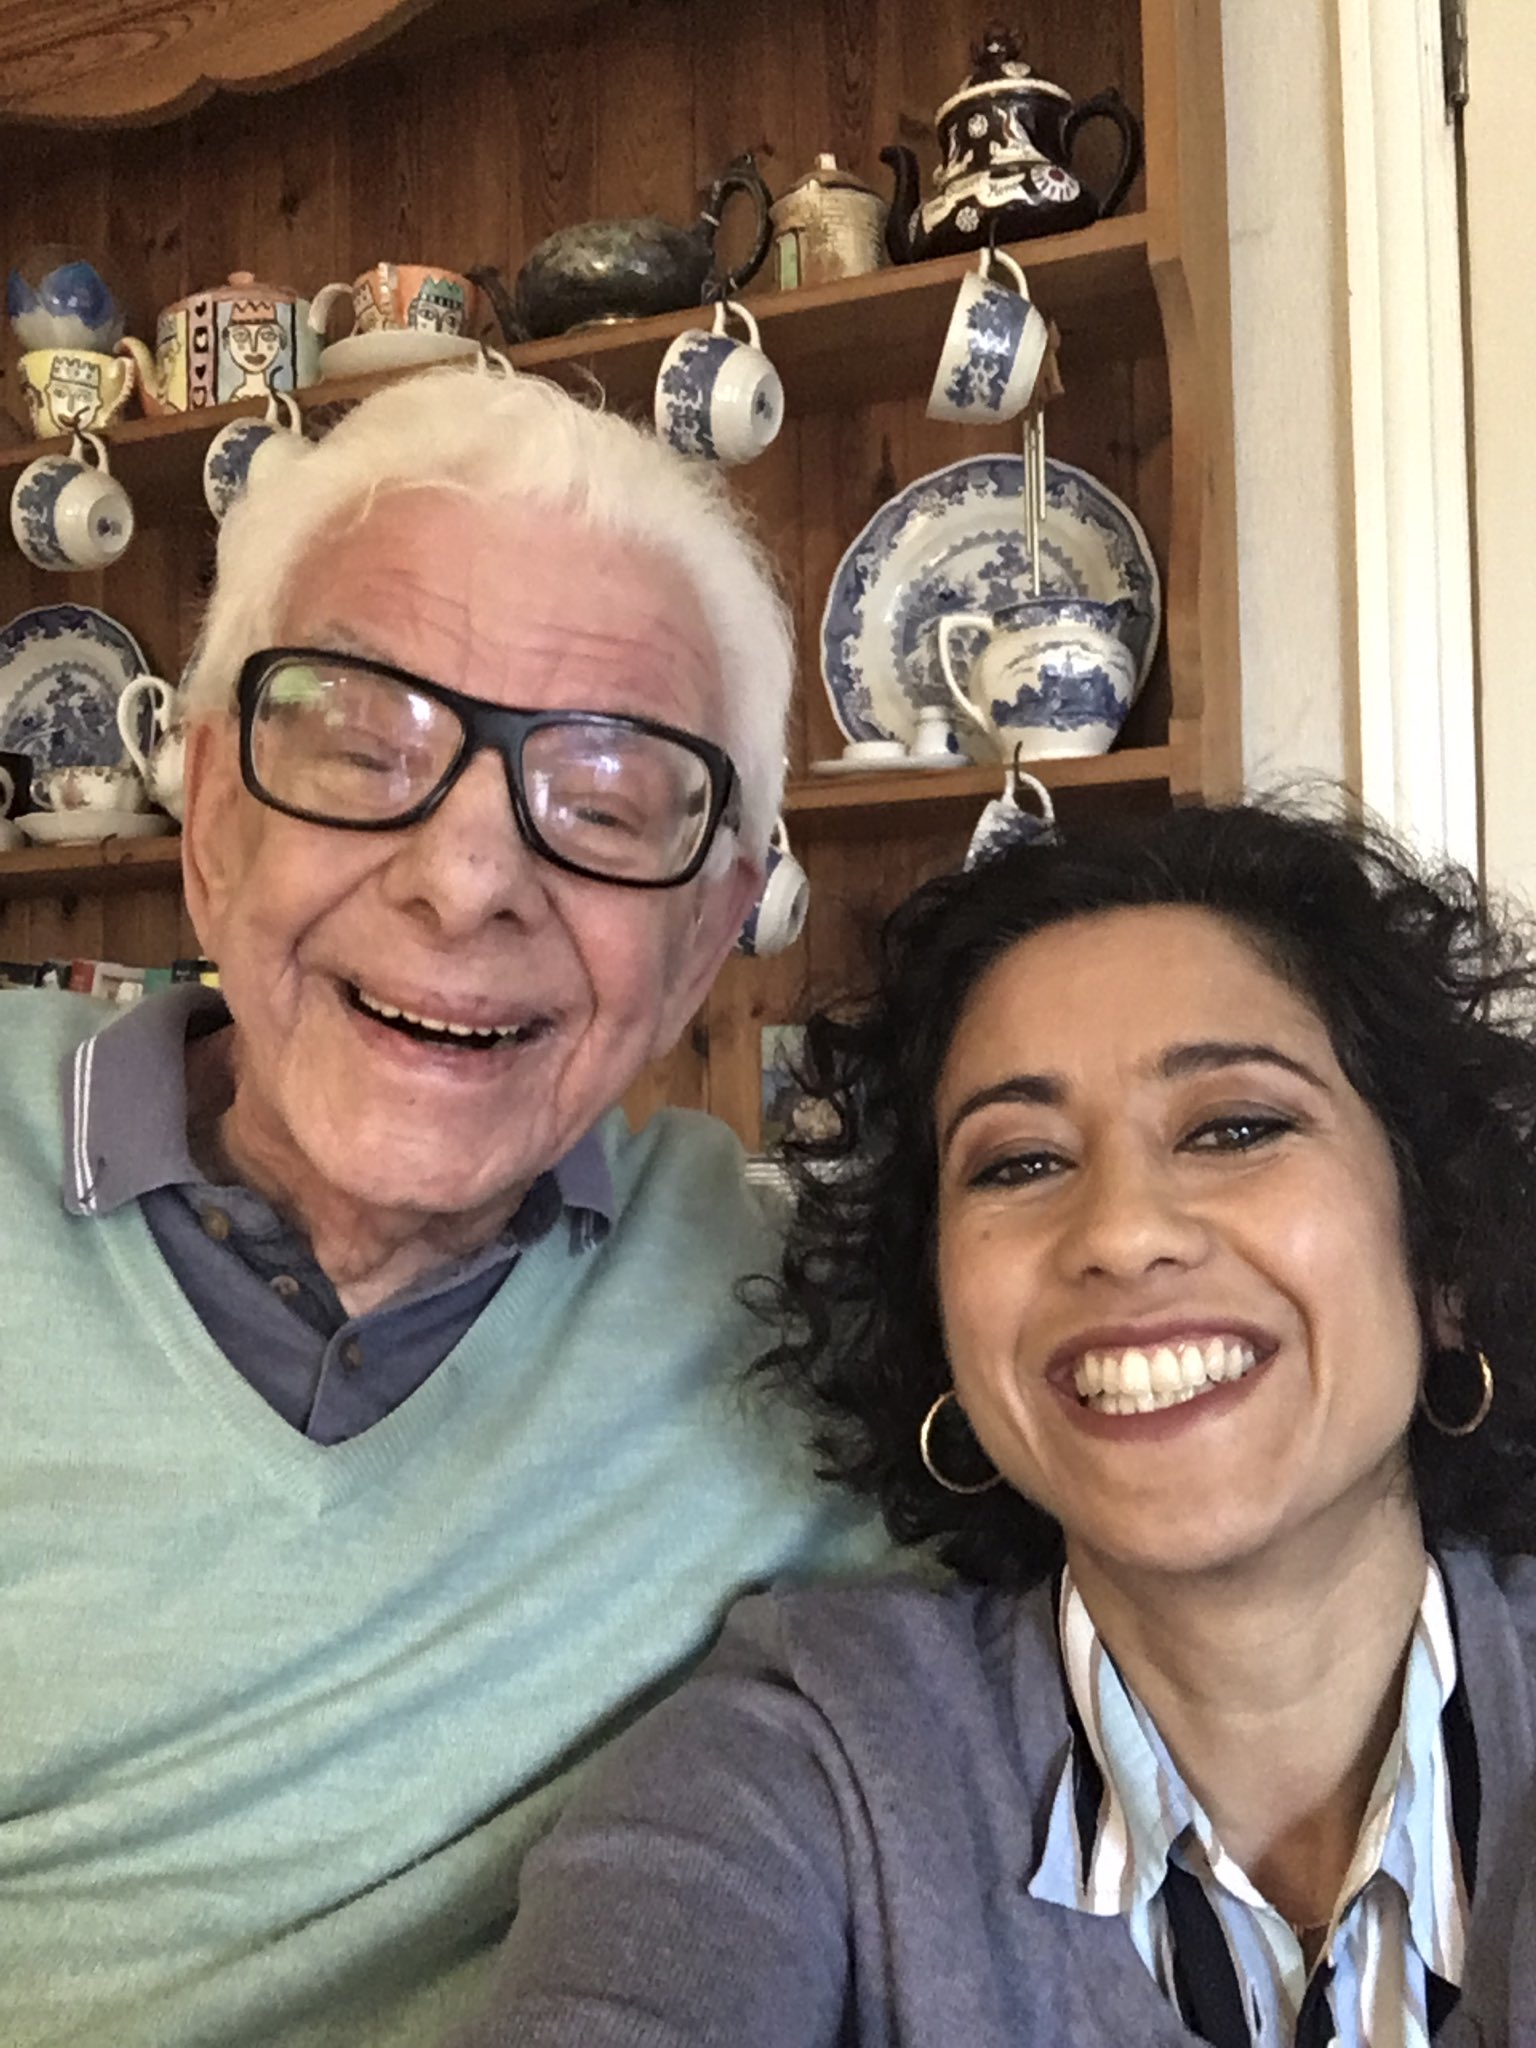 Happy birthday Barry Cryer!! (Taken almost exactly a year ago when I went round to talk about Kenny Everett) 